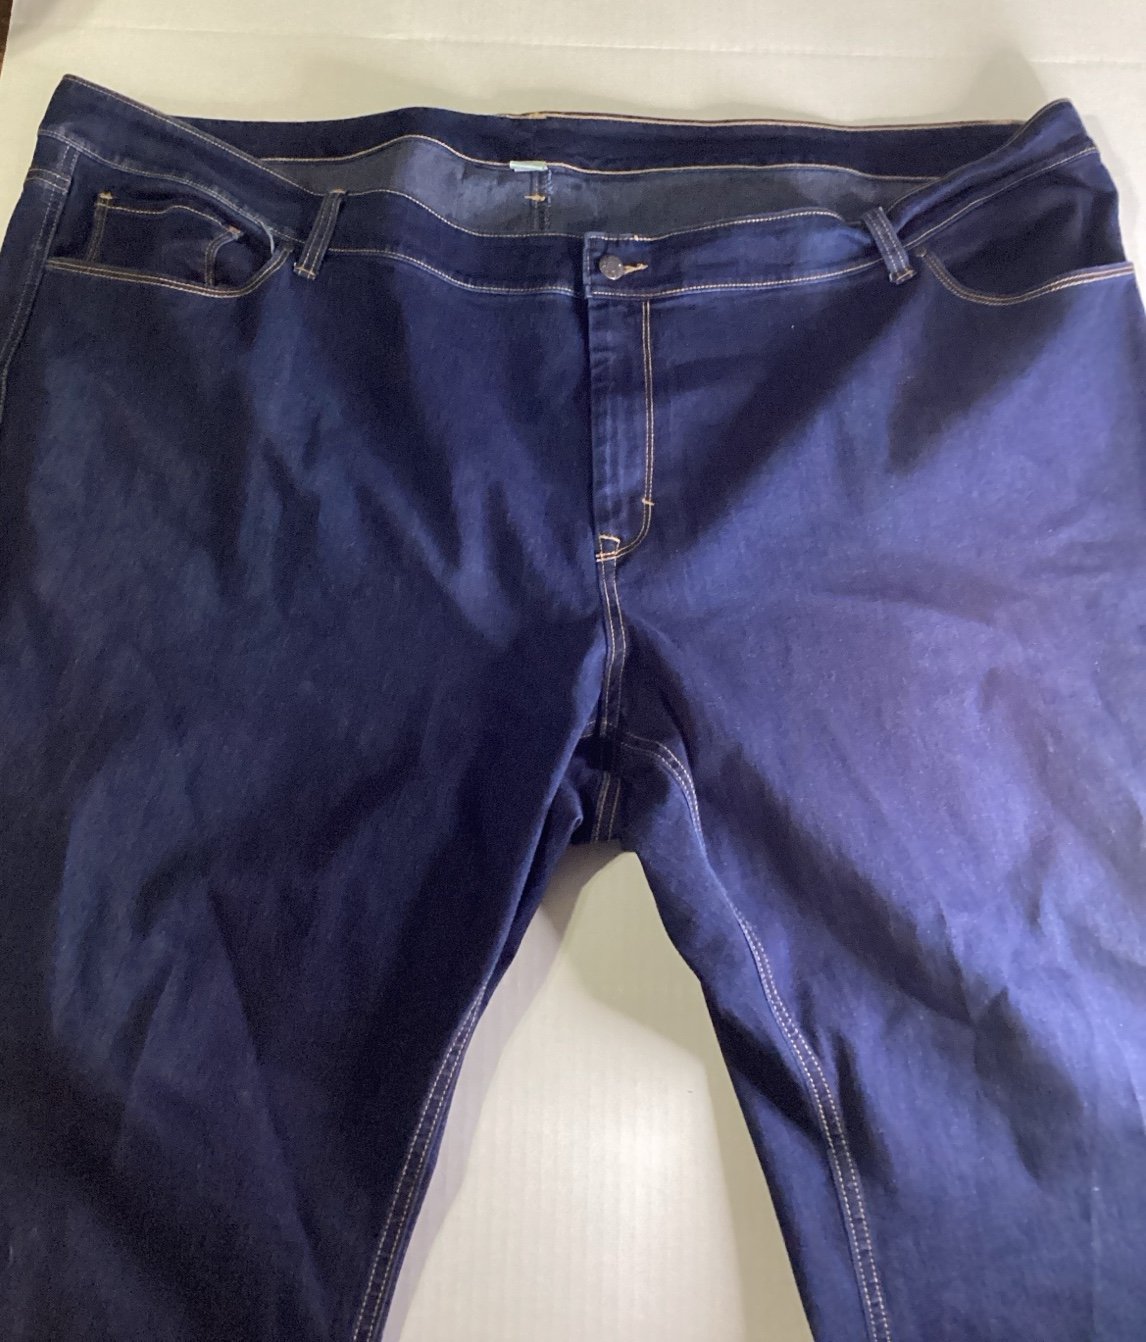 Discounted Old Navy Plus Size Jeans Size 30 Short j1dOG